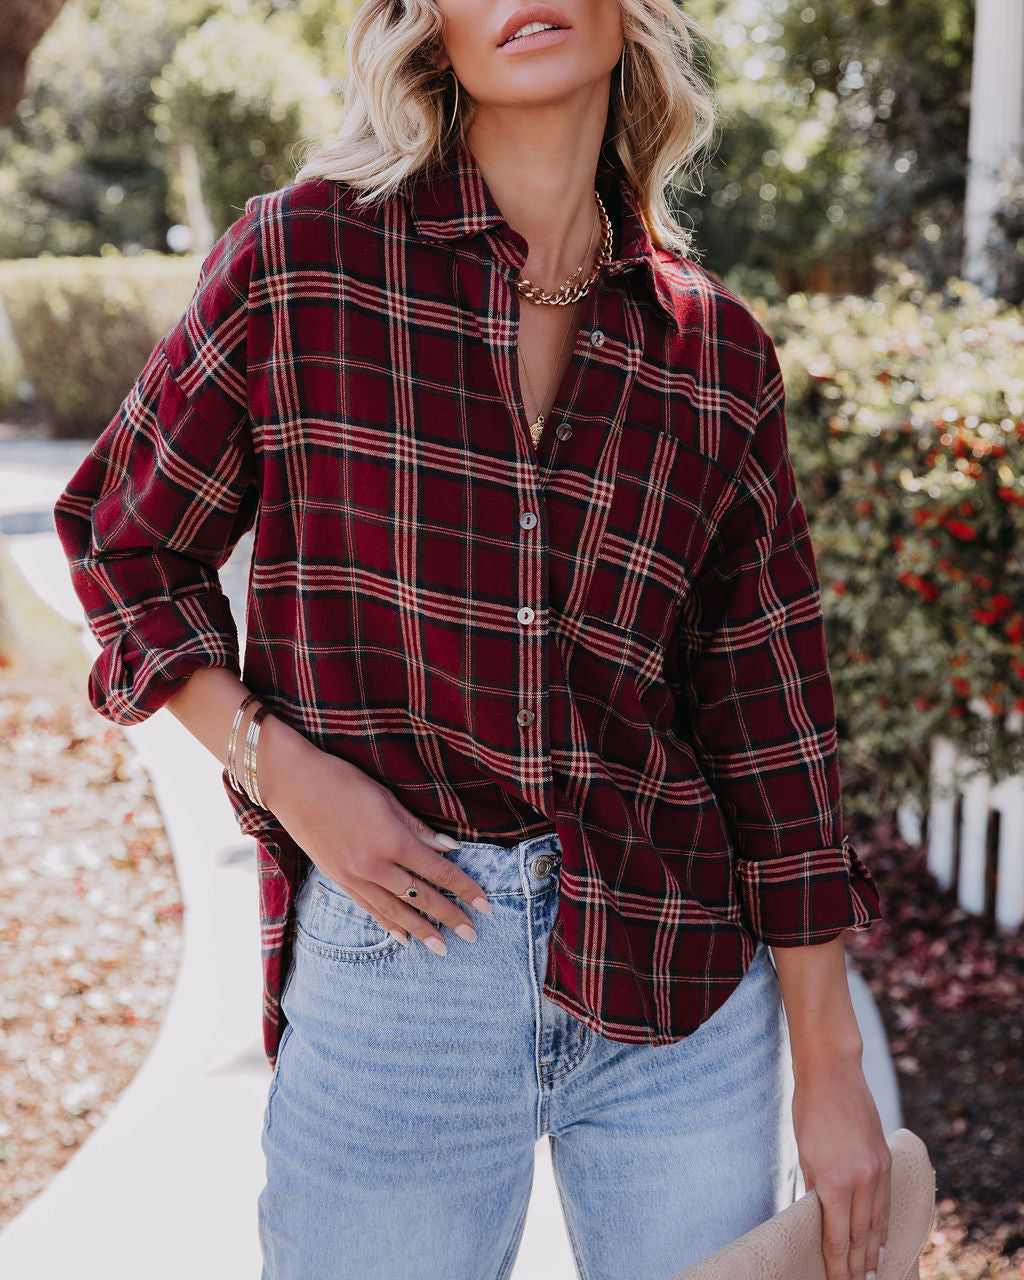 Marshall Cotton Plaid Button Down Top Ins Street